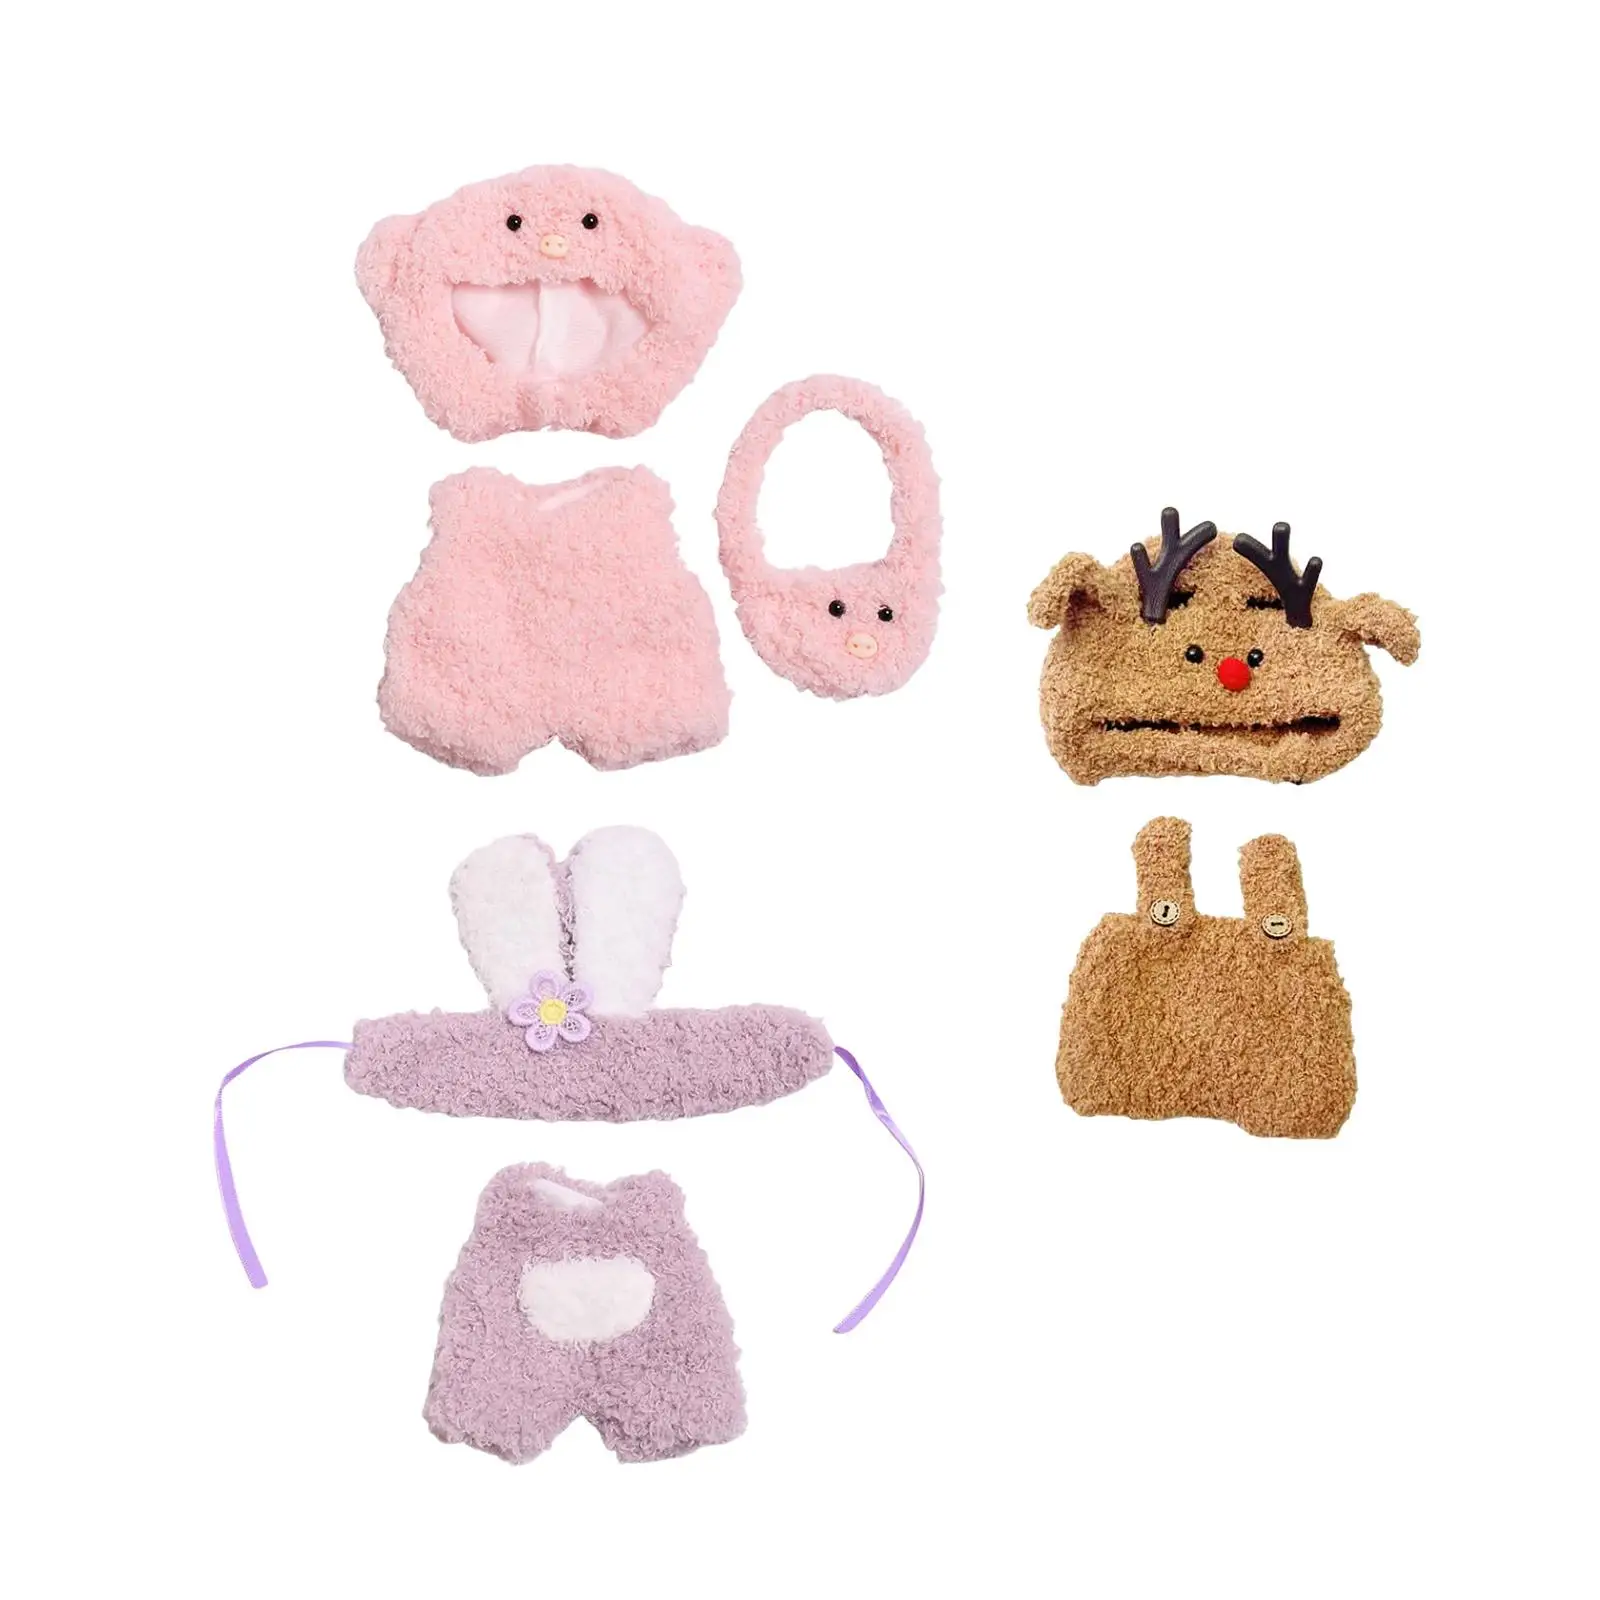 Doll Clothes Plush Doll Accessories DIY Stylish Doll Outifits for 17cm Dolls